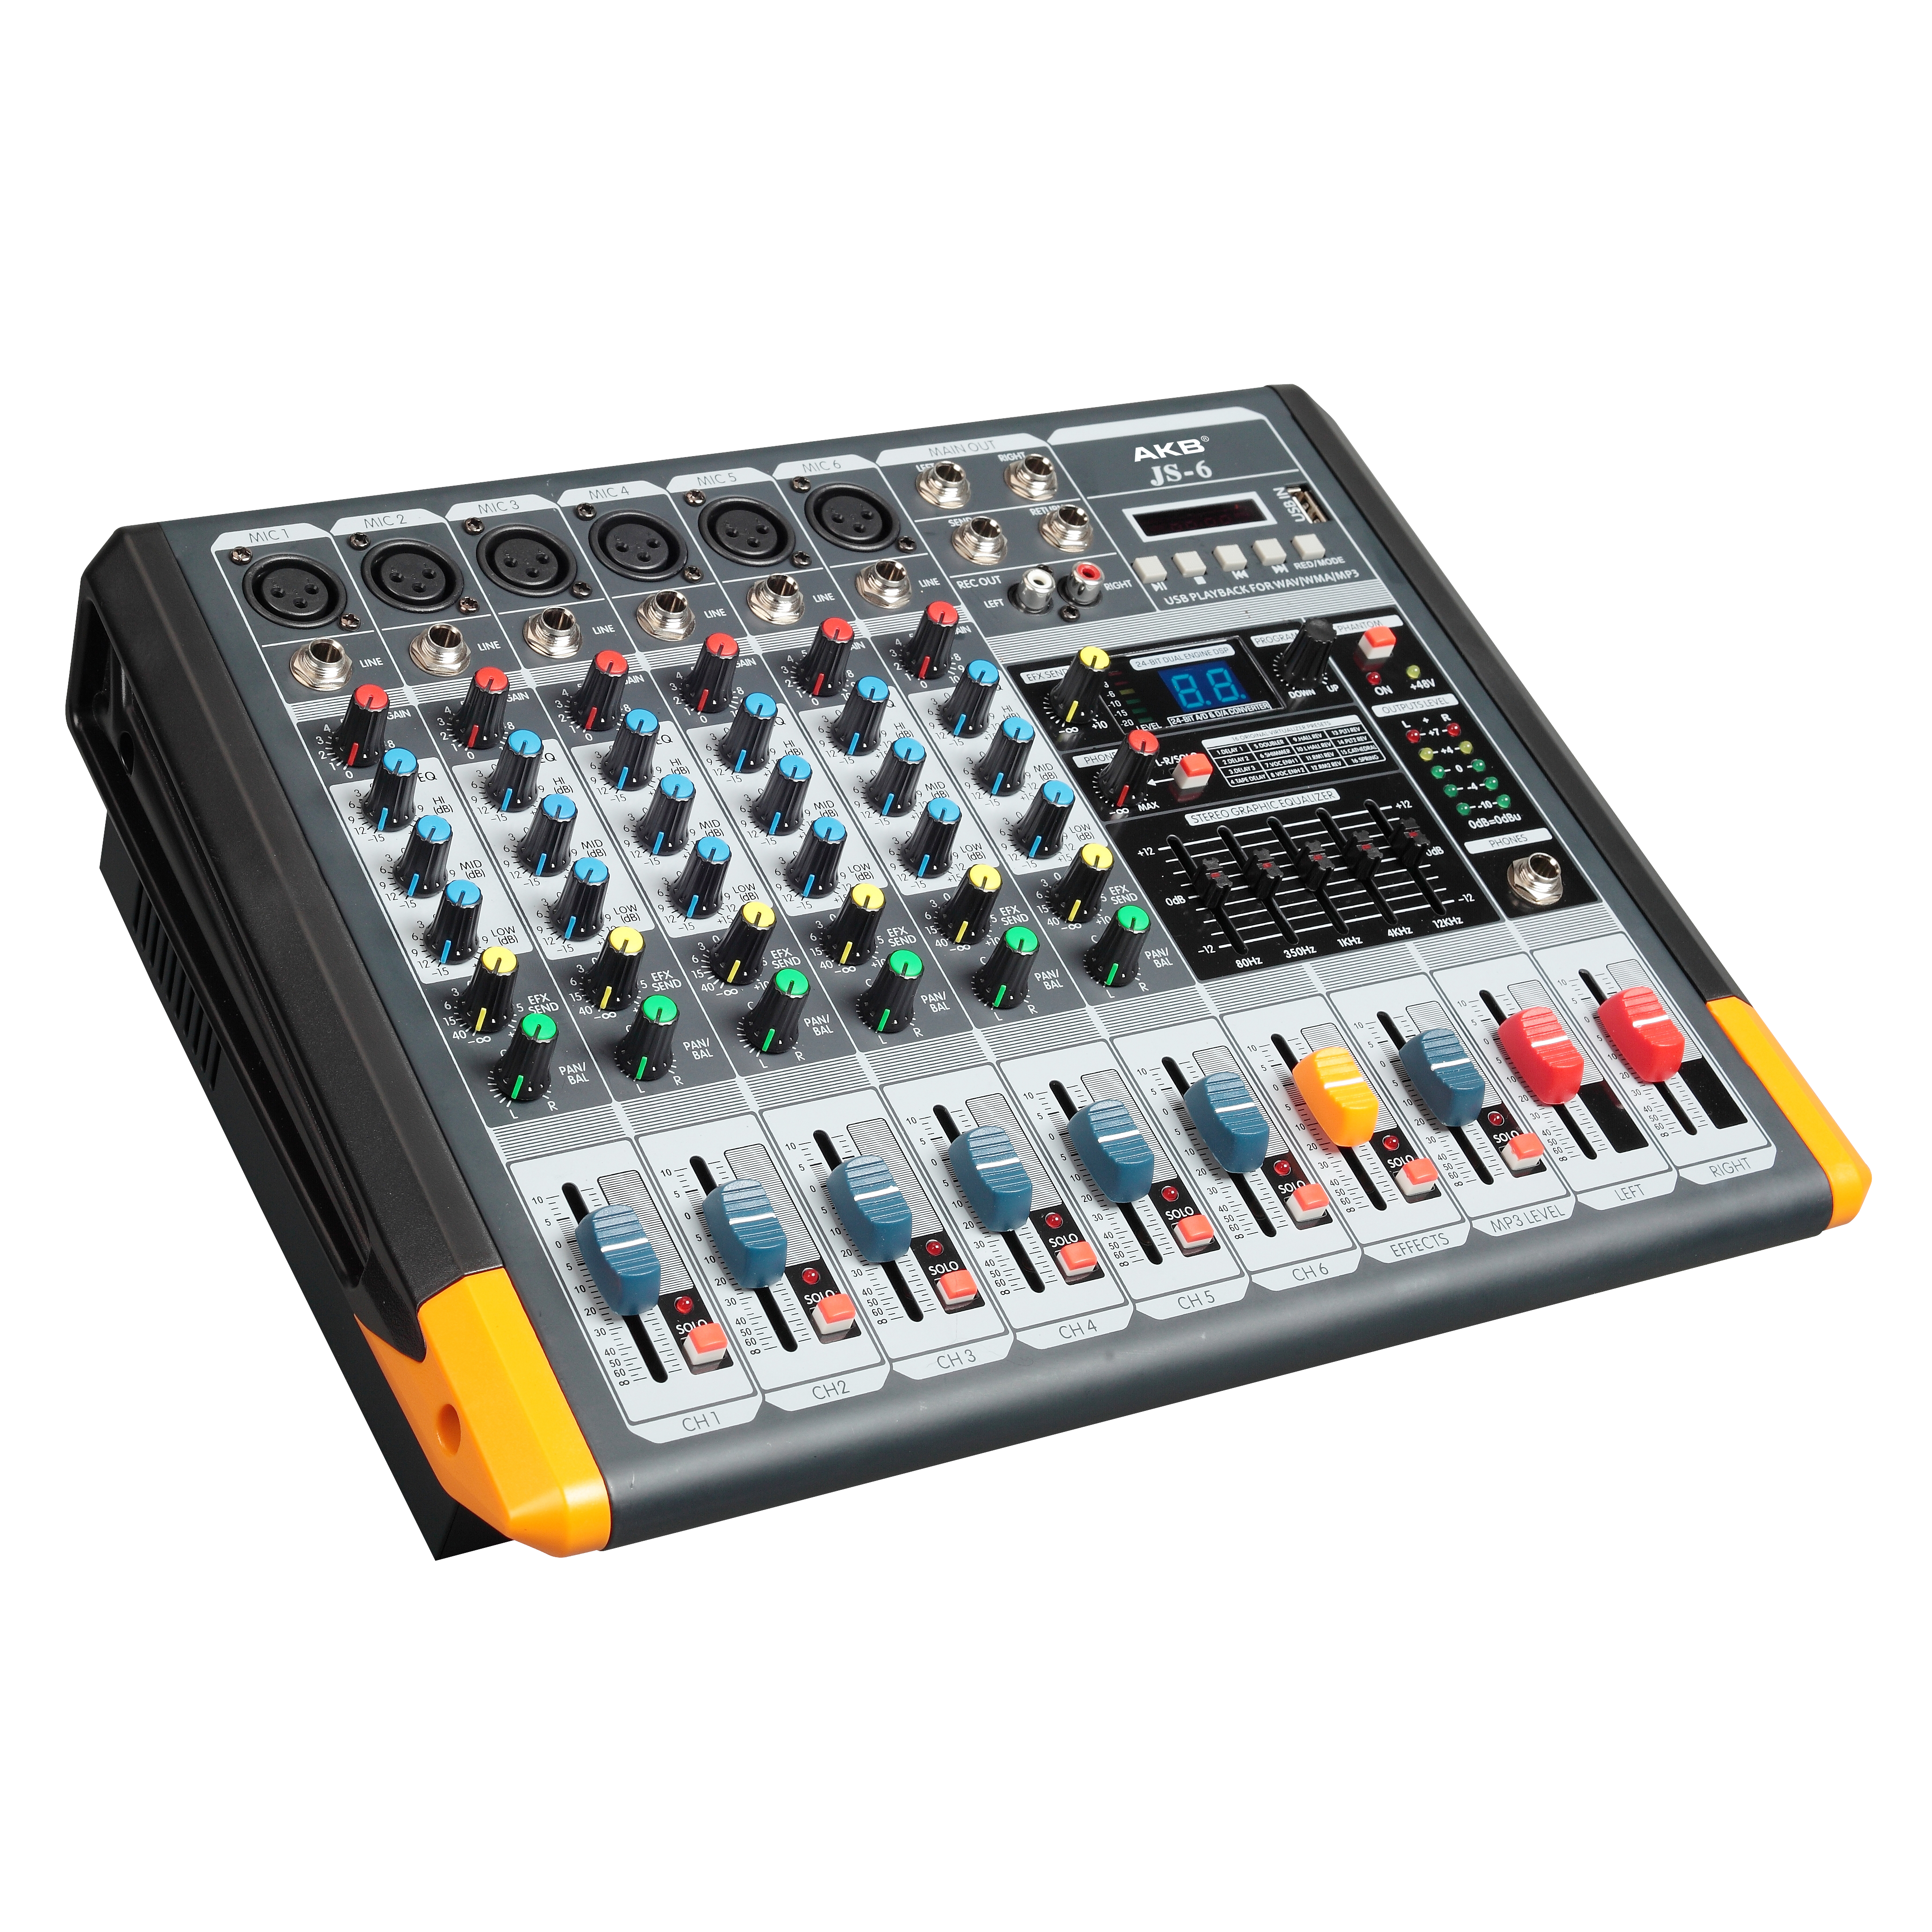 JS-6D hot sell professional mixer console with competitive price